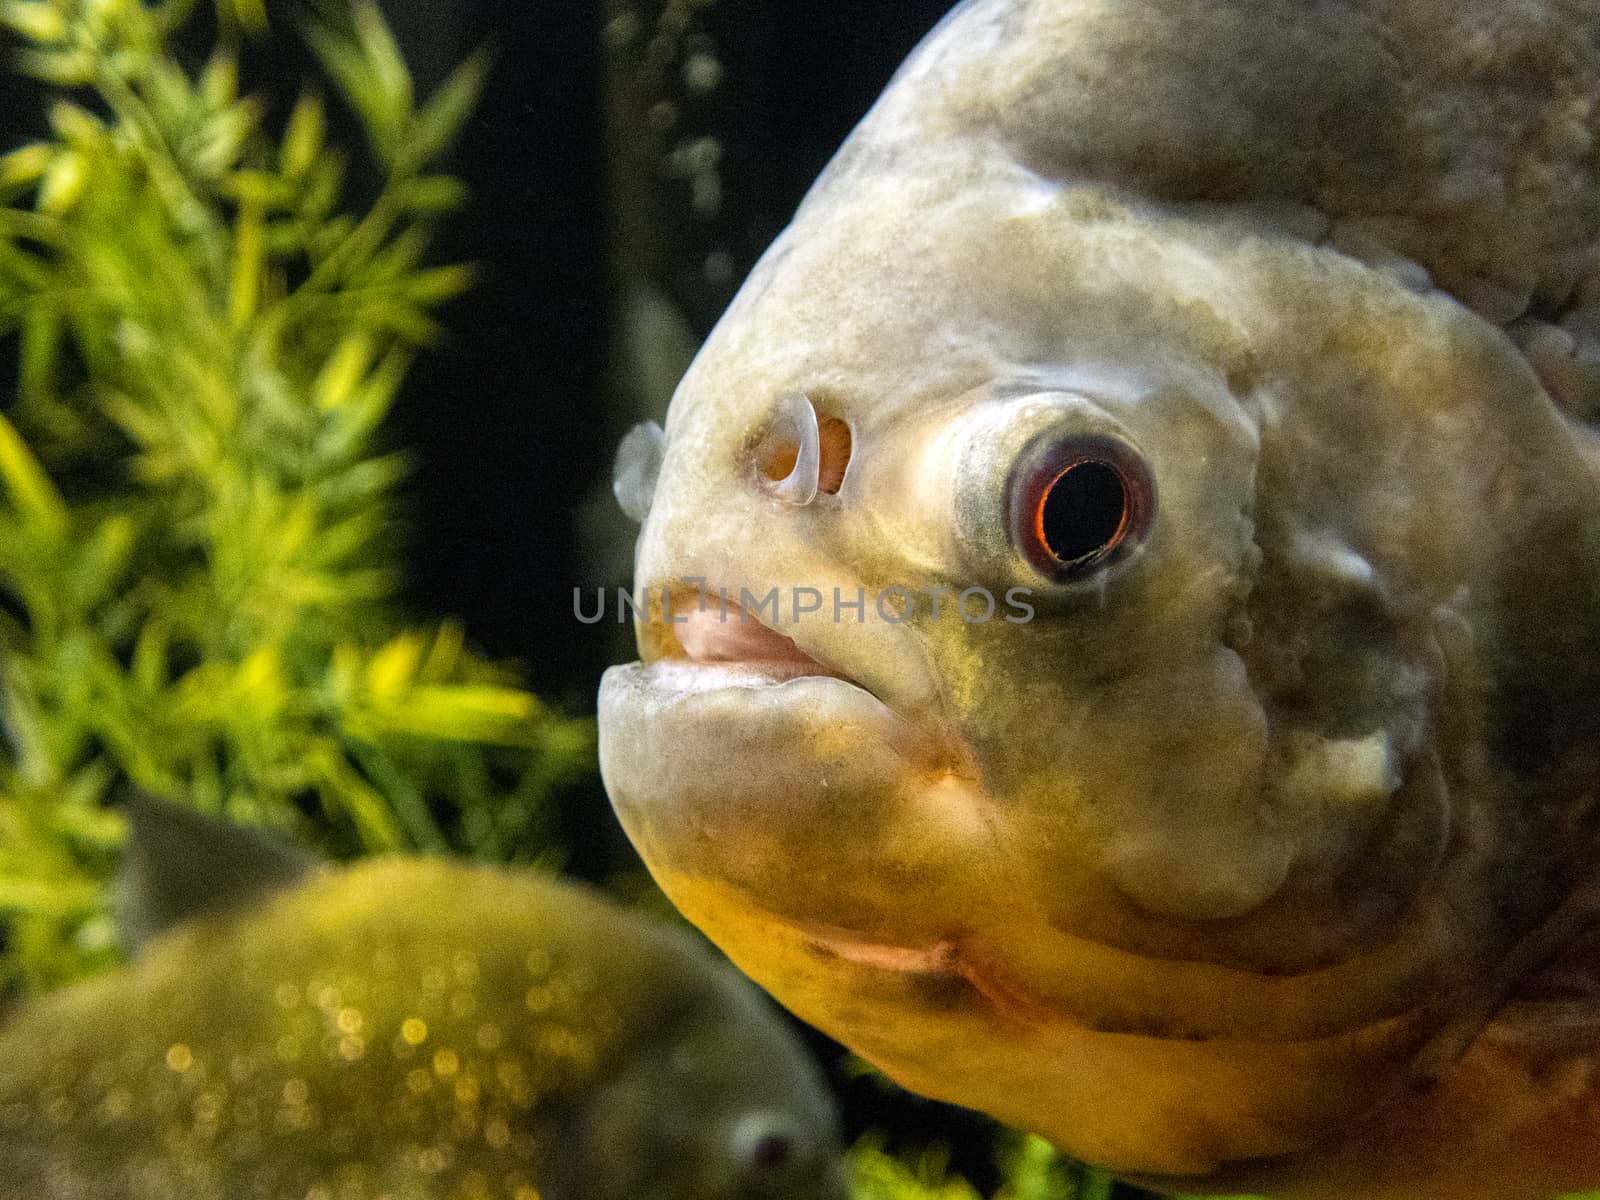 Red-bellied piranha portrait of a infamous fish